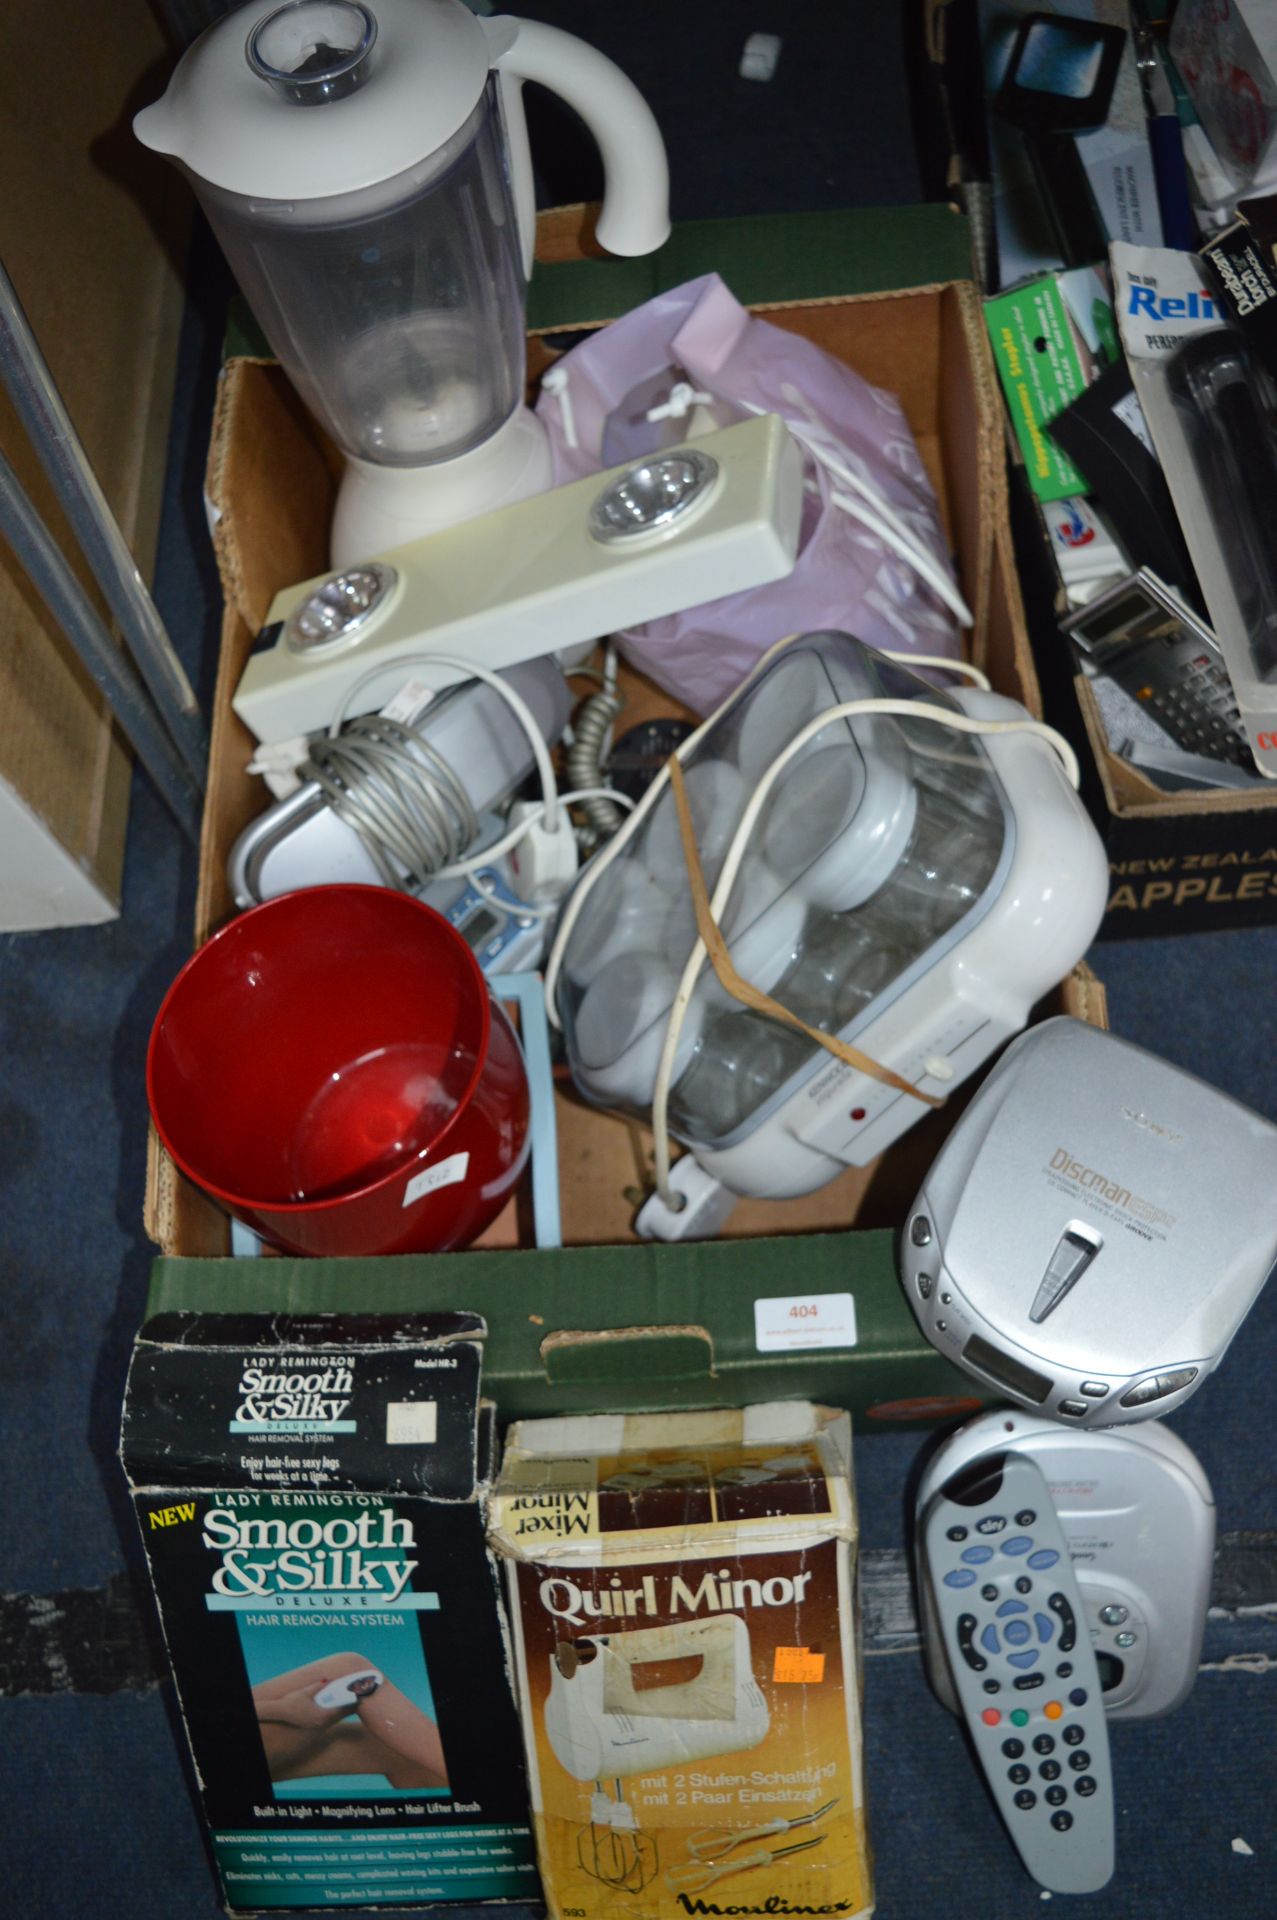 Kitchenware and Electrical Items